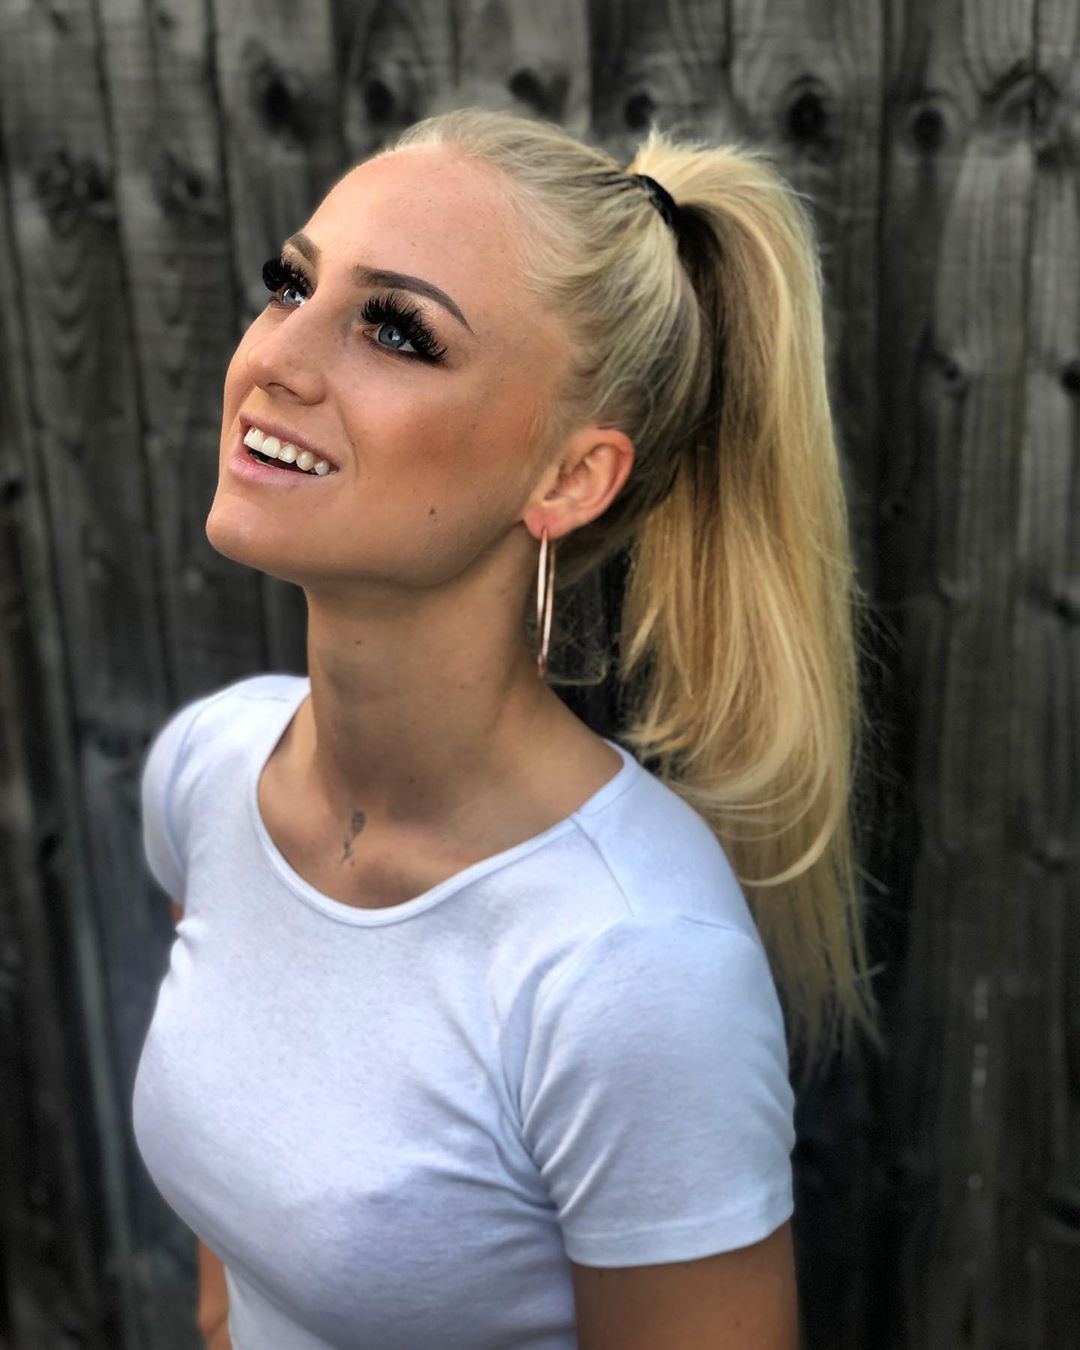 Alisha Lehmann on Instagram: “There is always a reason to smile